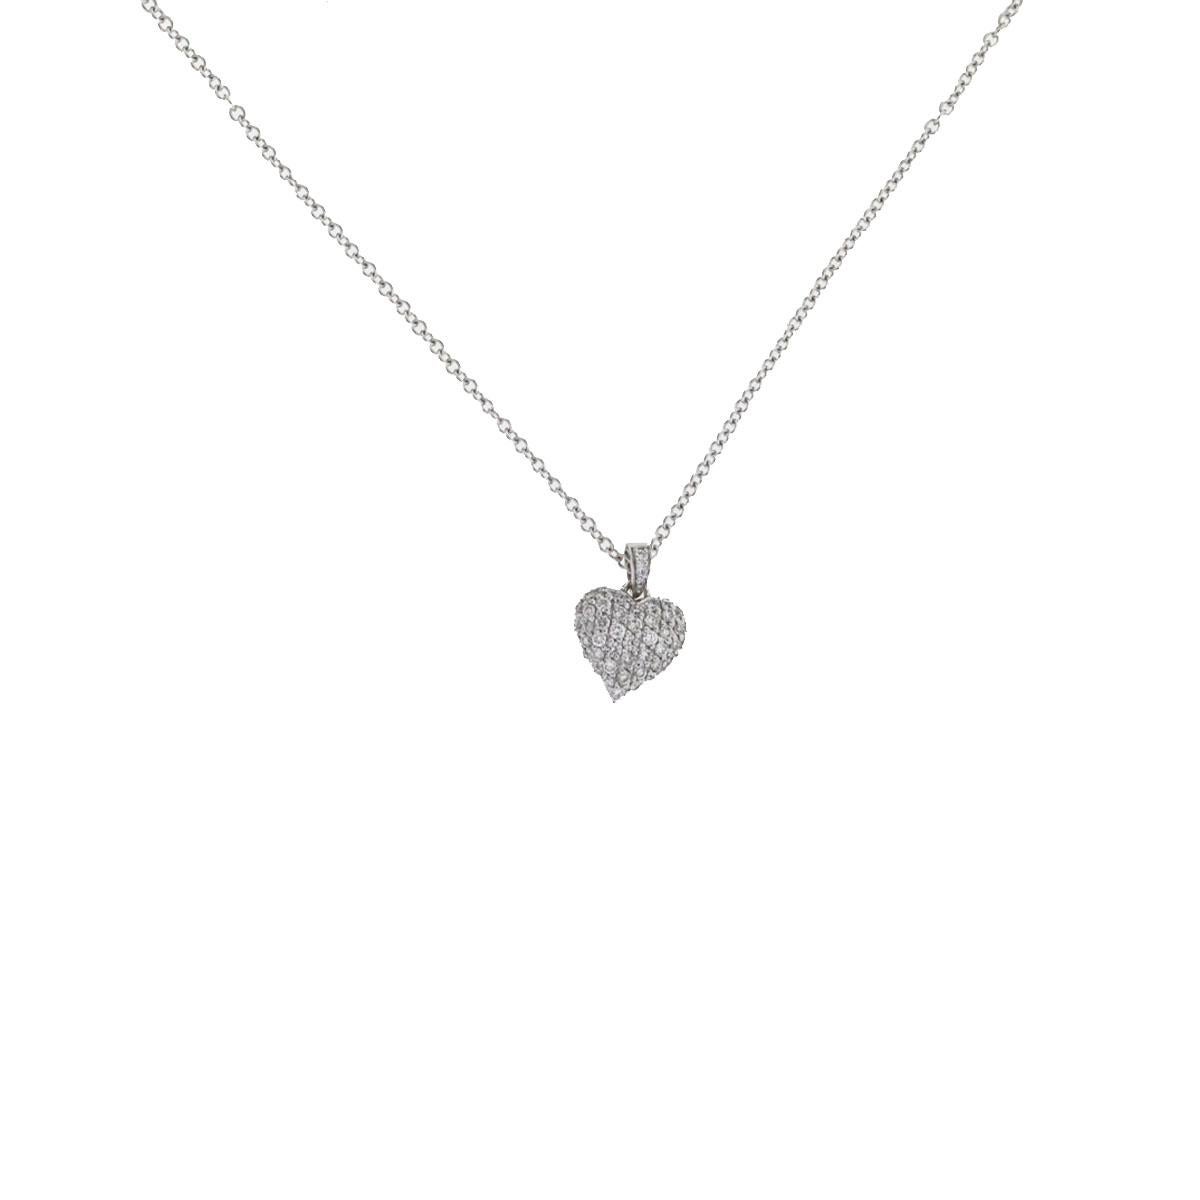 18 Karat White Gold Heart Pave Necklace with Fine Chain Necklace .48 Carat